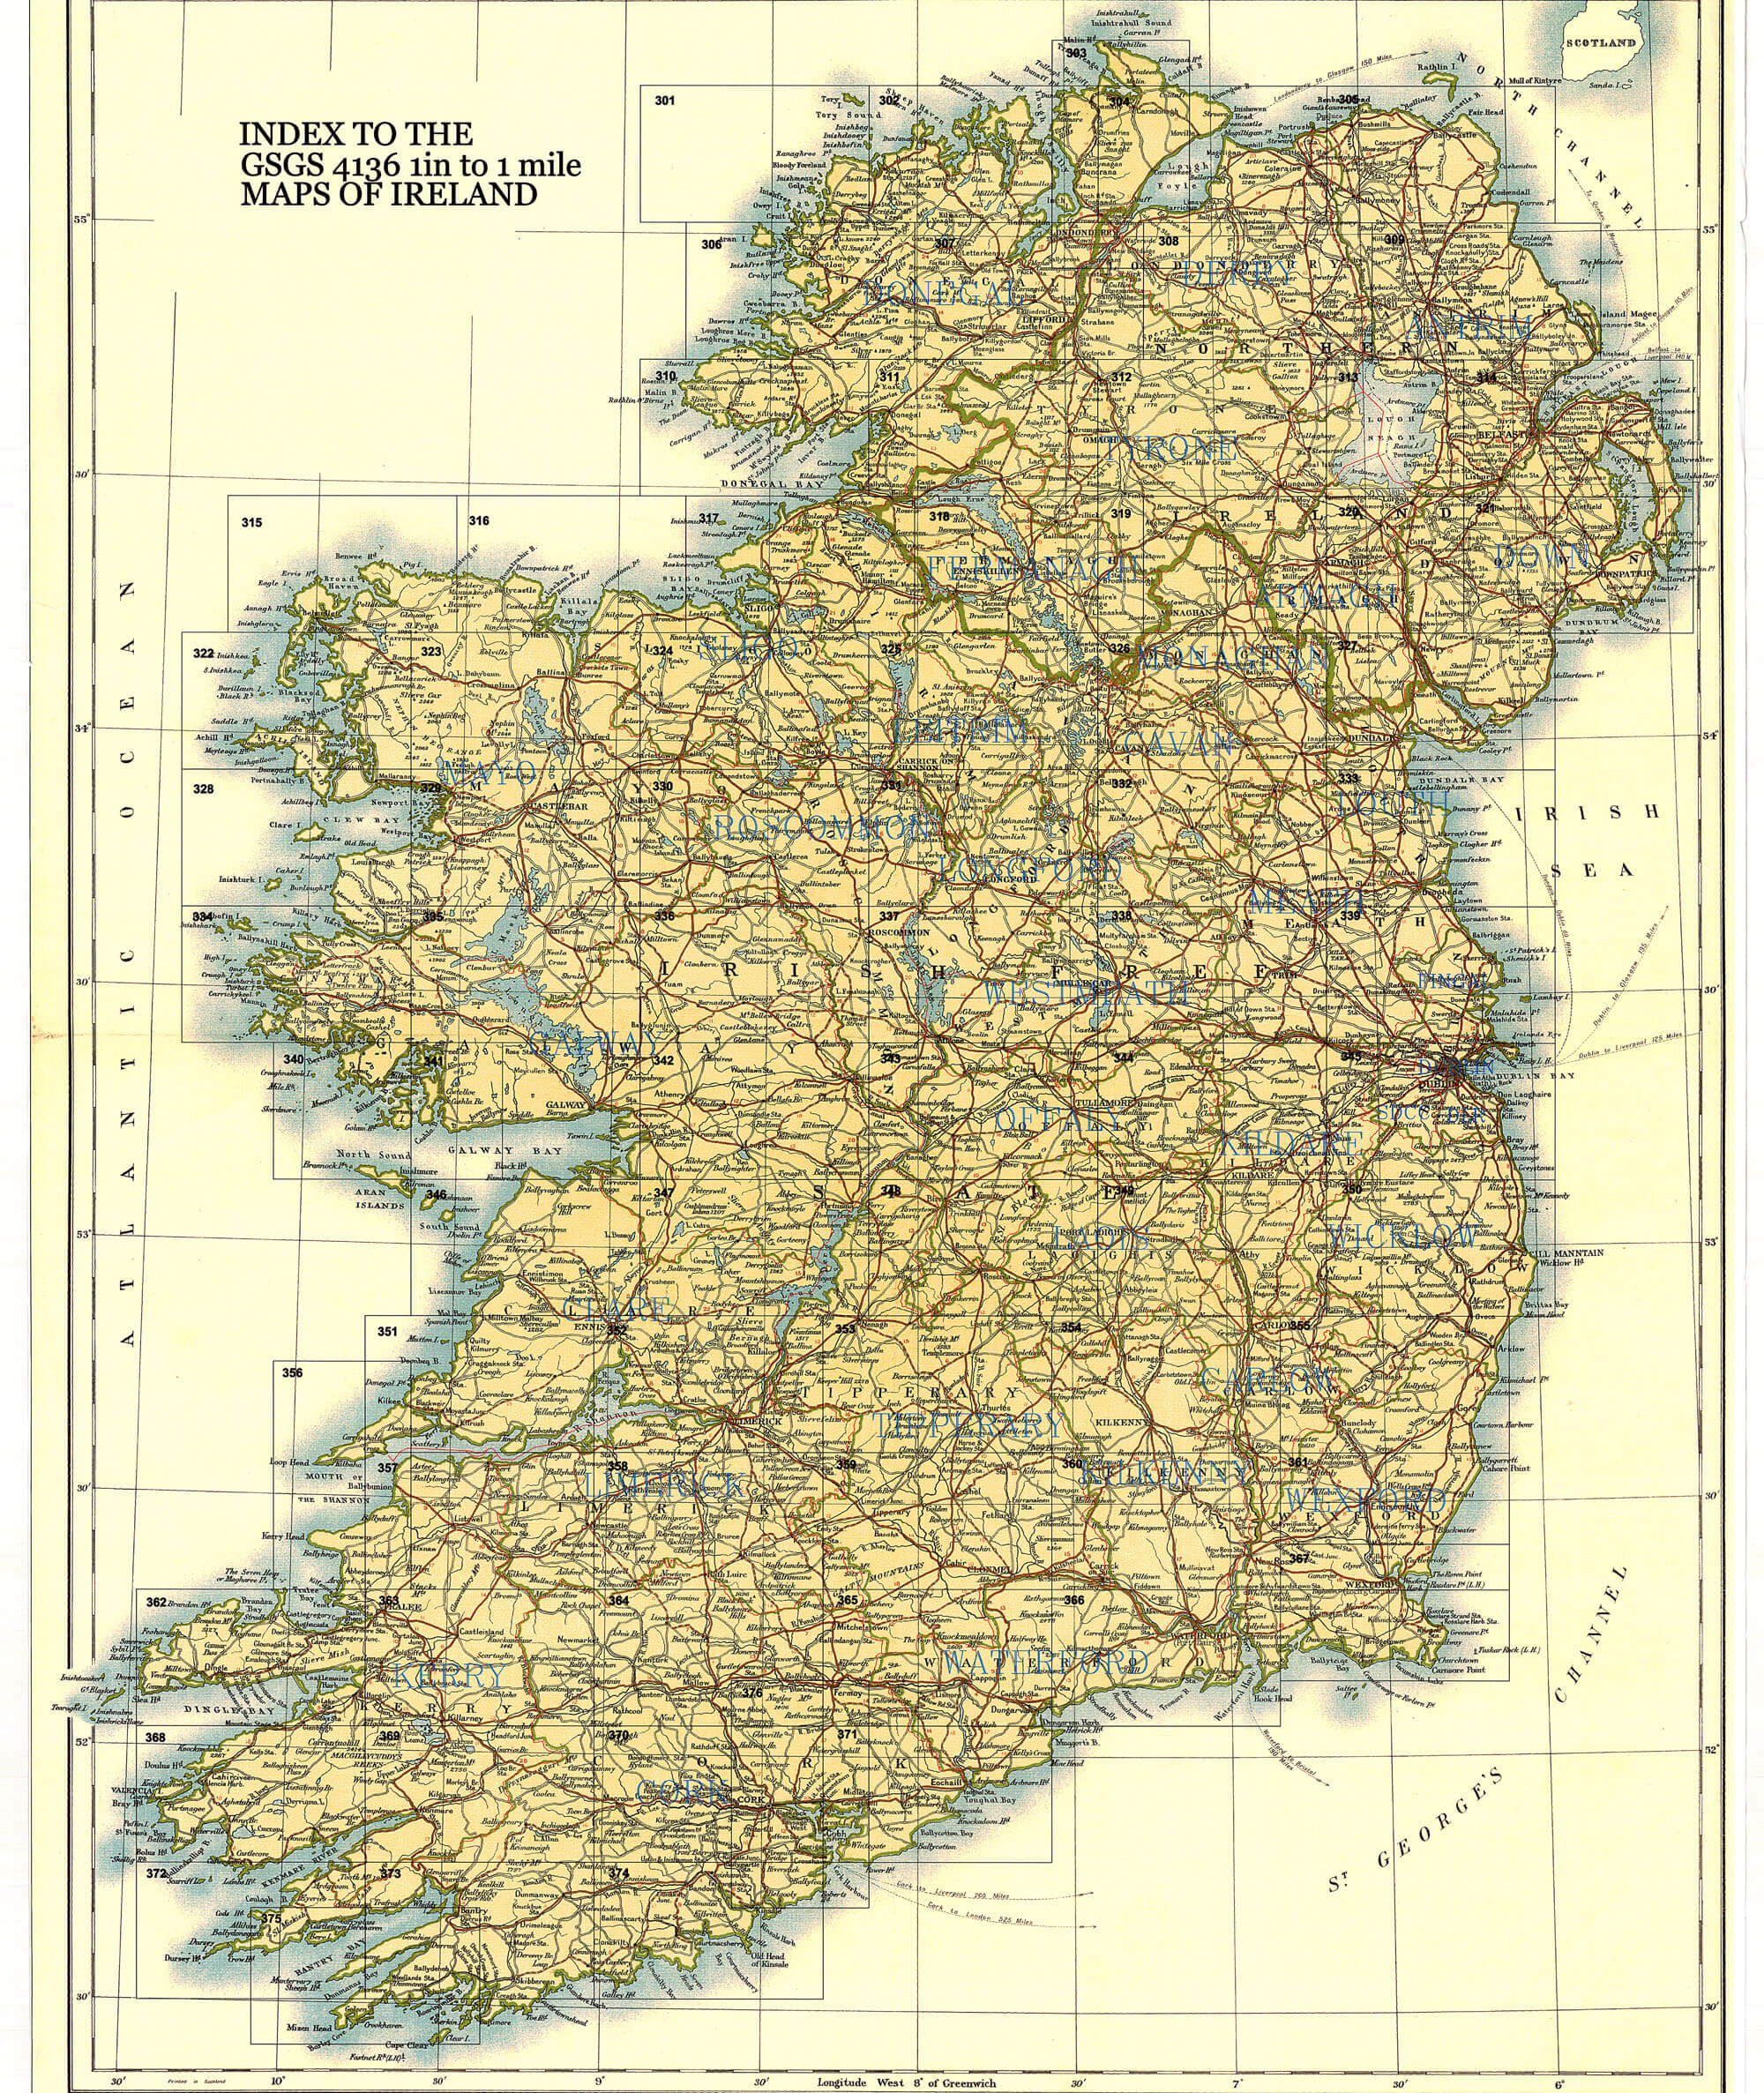 Ireland GSGS 4610 Topographic Maps1in to one mile Part 2 North Sheets ...